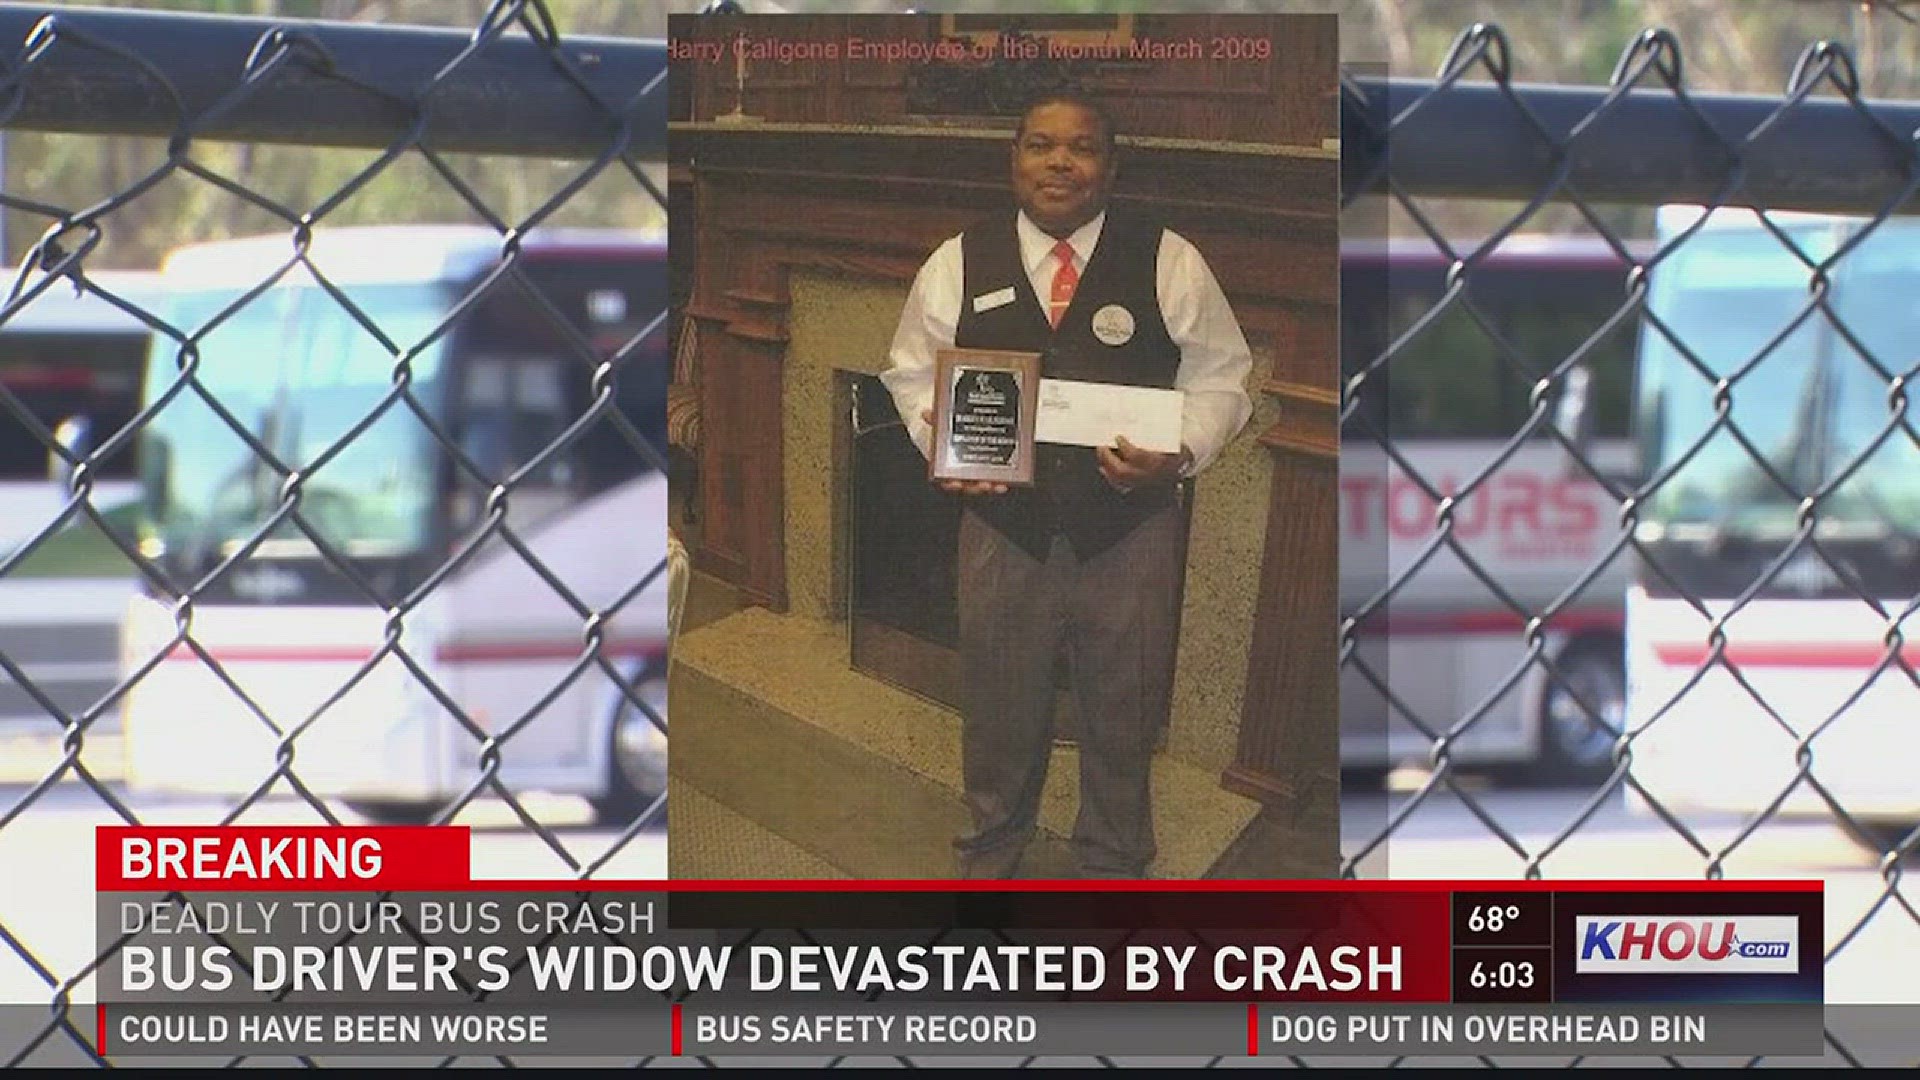 The widow of the driver killed in a bus crash in Alabama talked with KHOU 11 News.